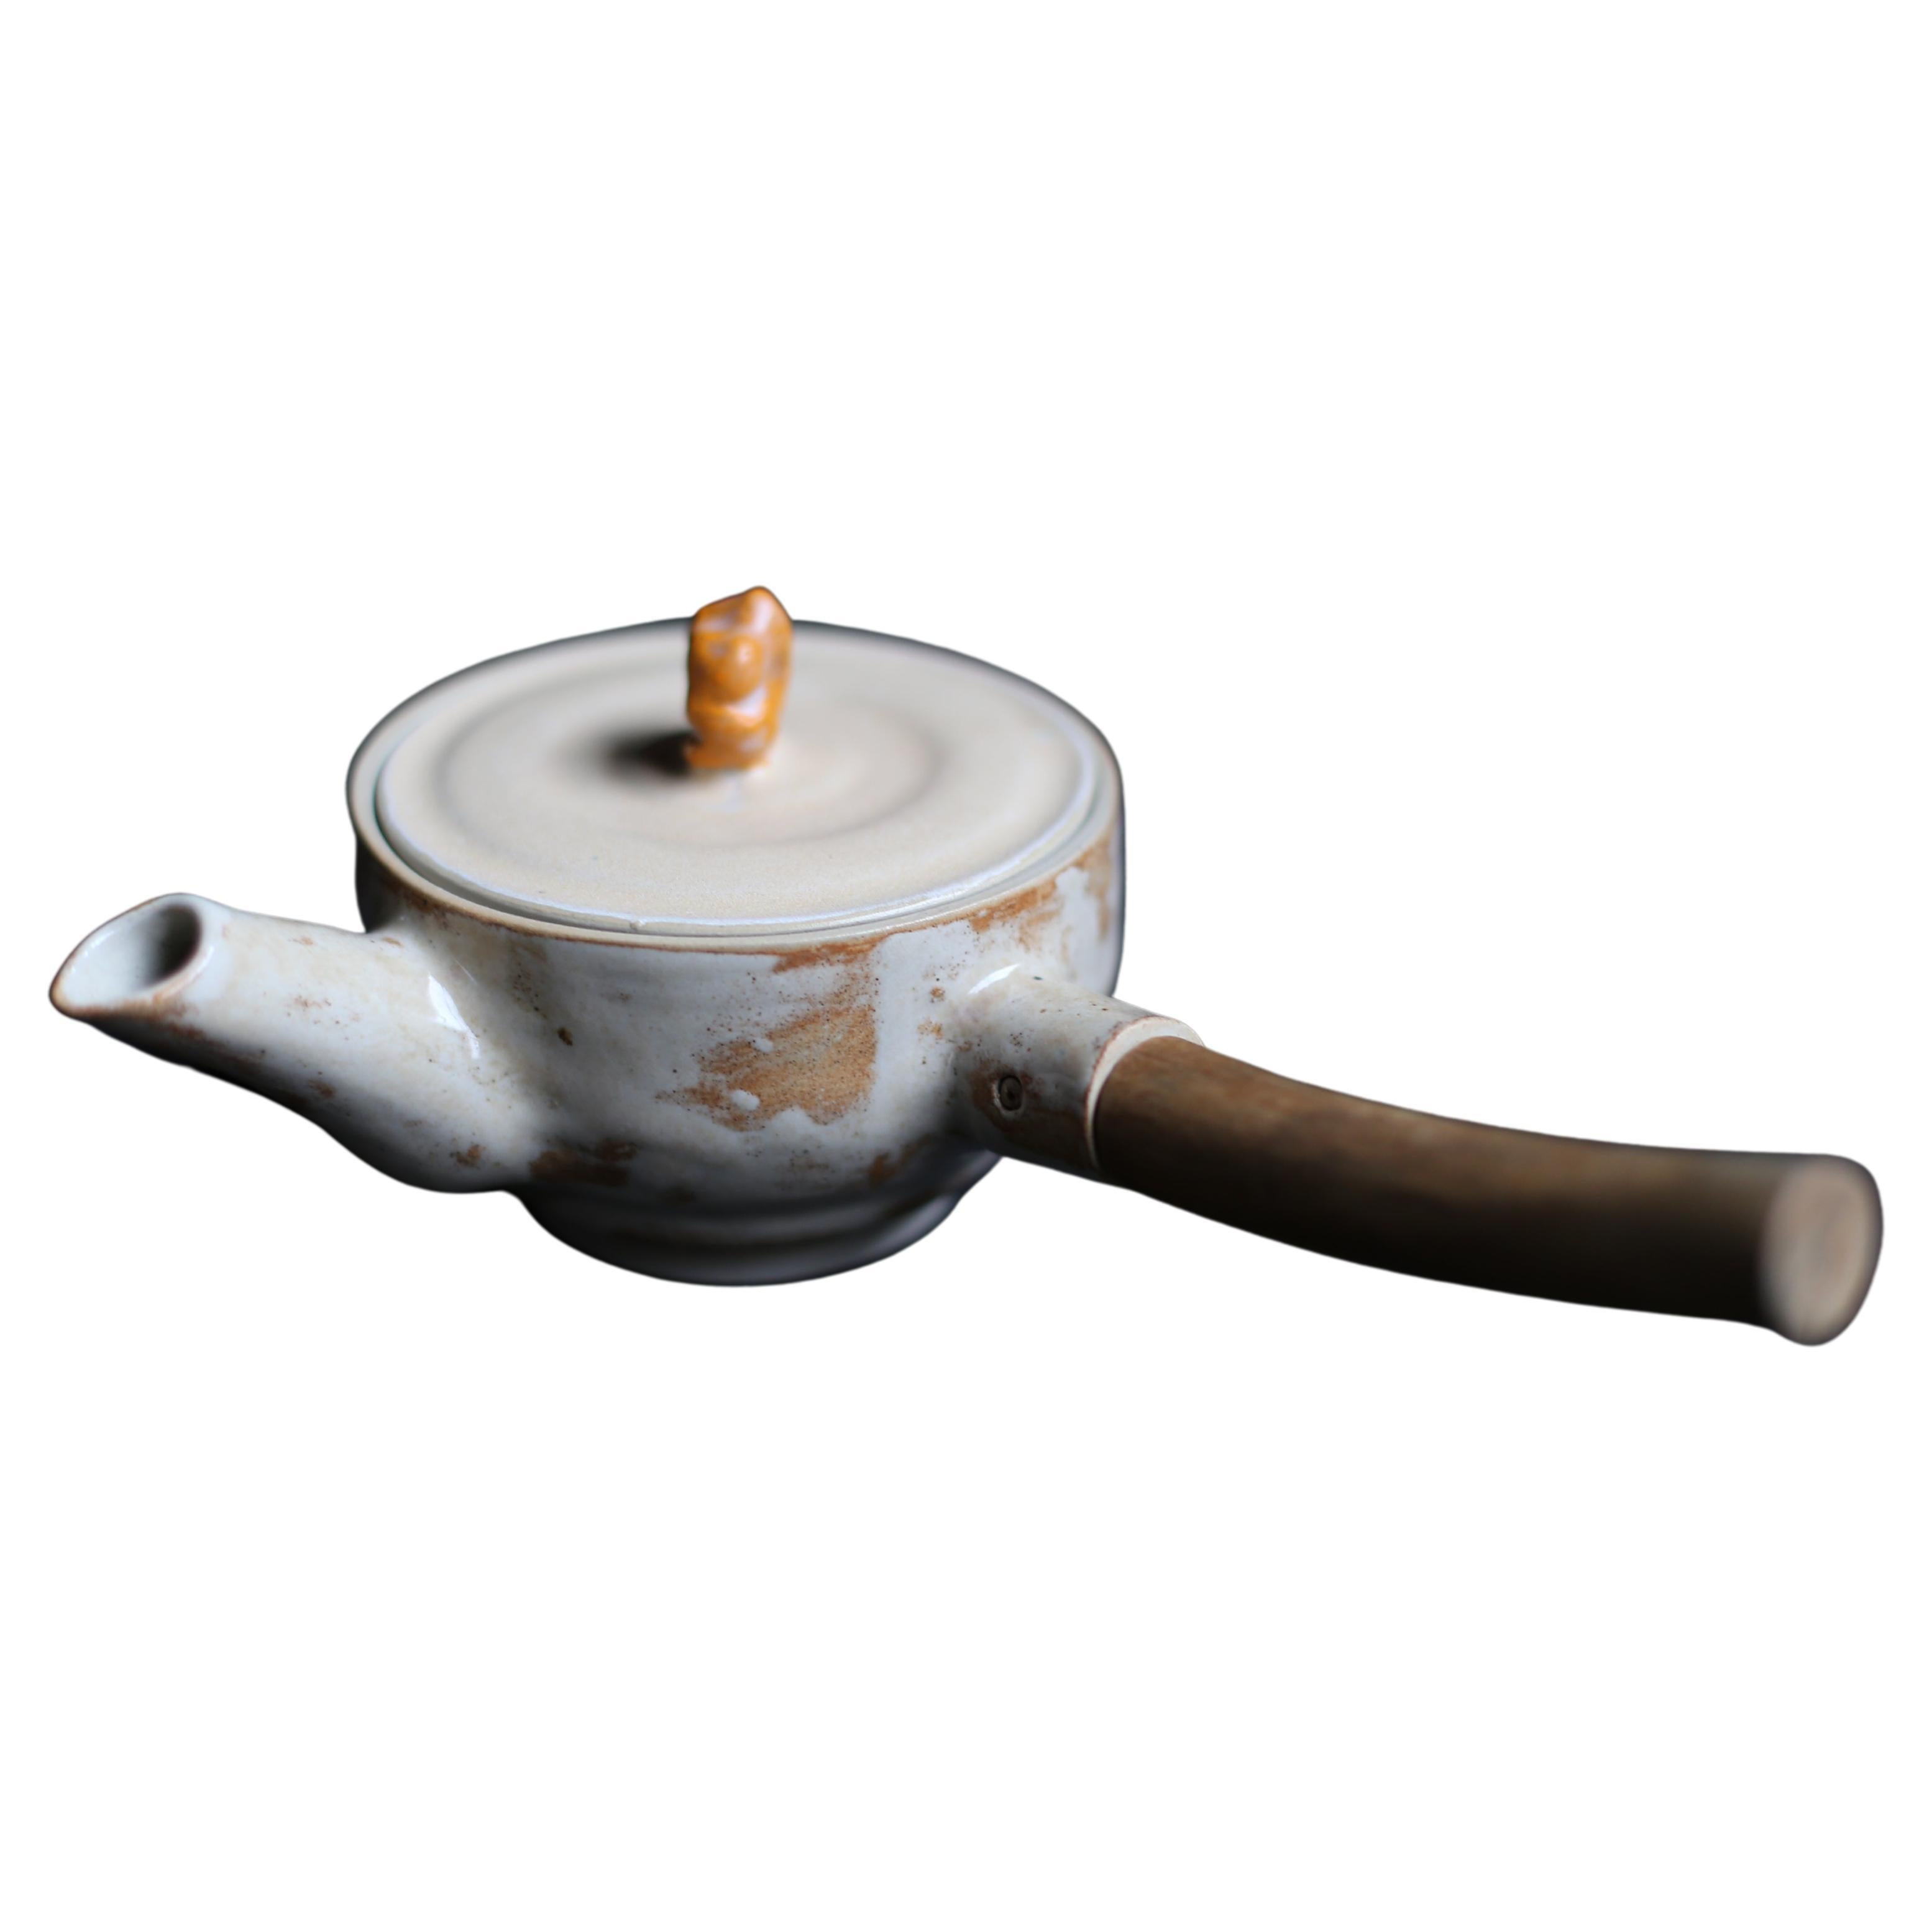 Wheel Thrown Teapot with a Branch Handle 'Joinery' in White Clay with Cream For Sale